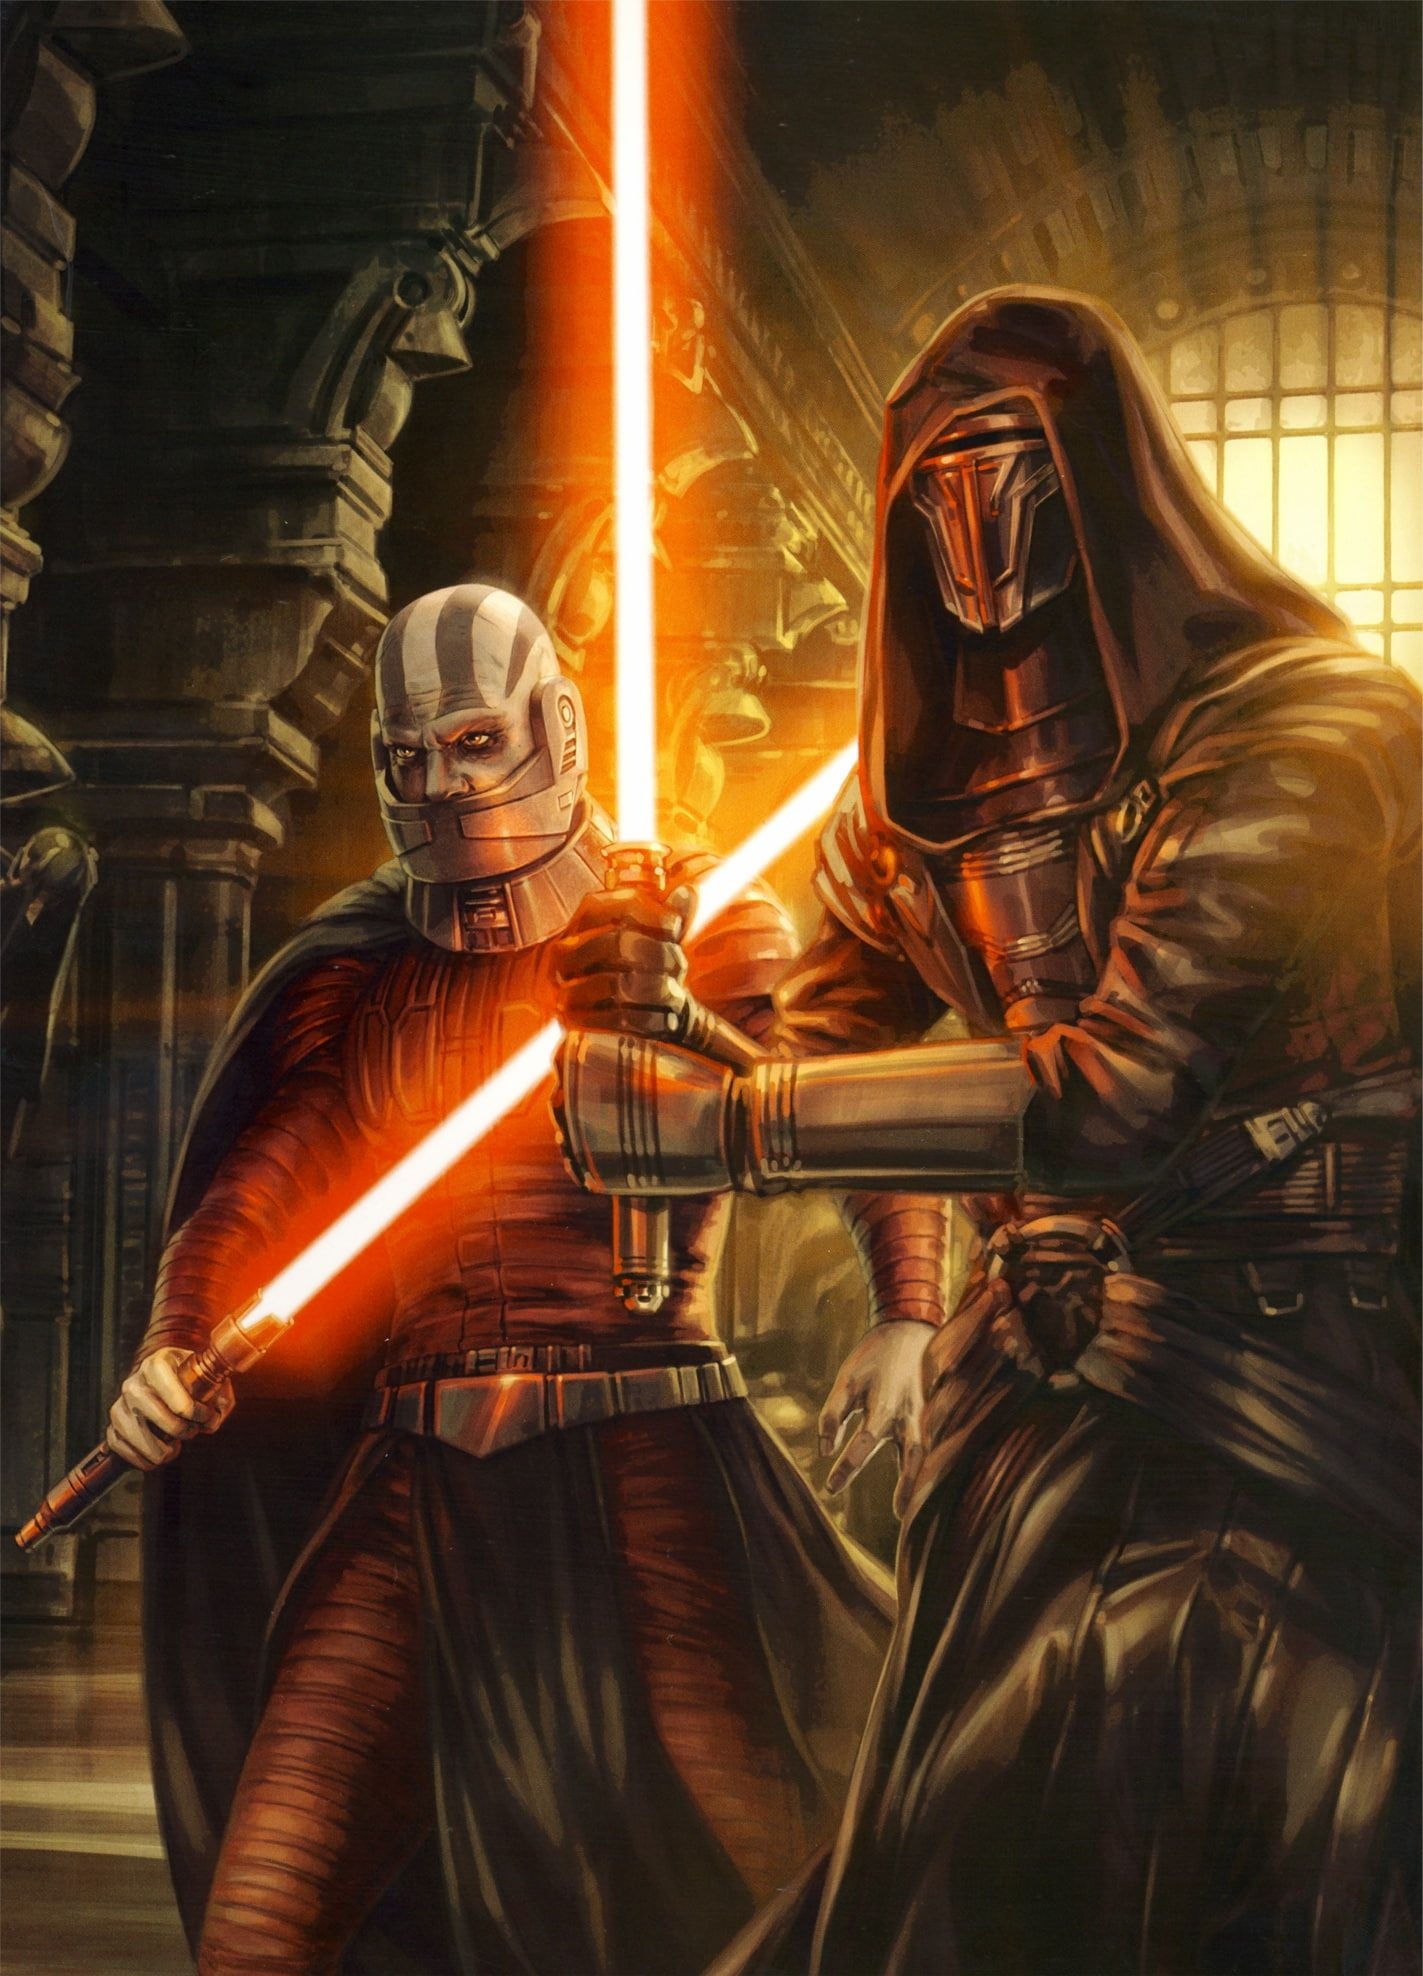 Lightsabers in action, Darth Revan's legacy, Sith Lords confrontation, Star Wars artistry, 1430x1980 HD Handy